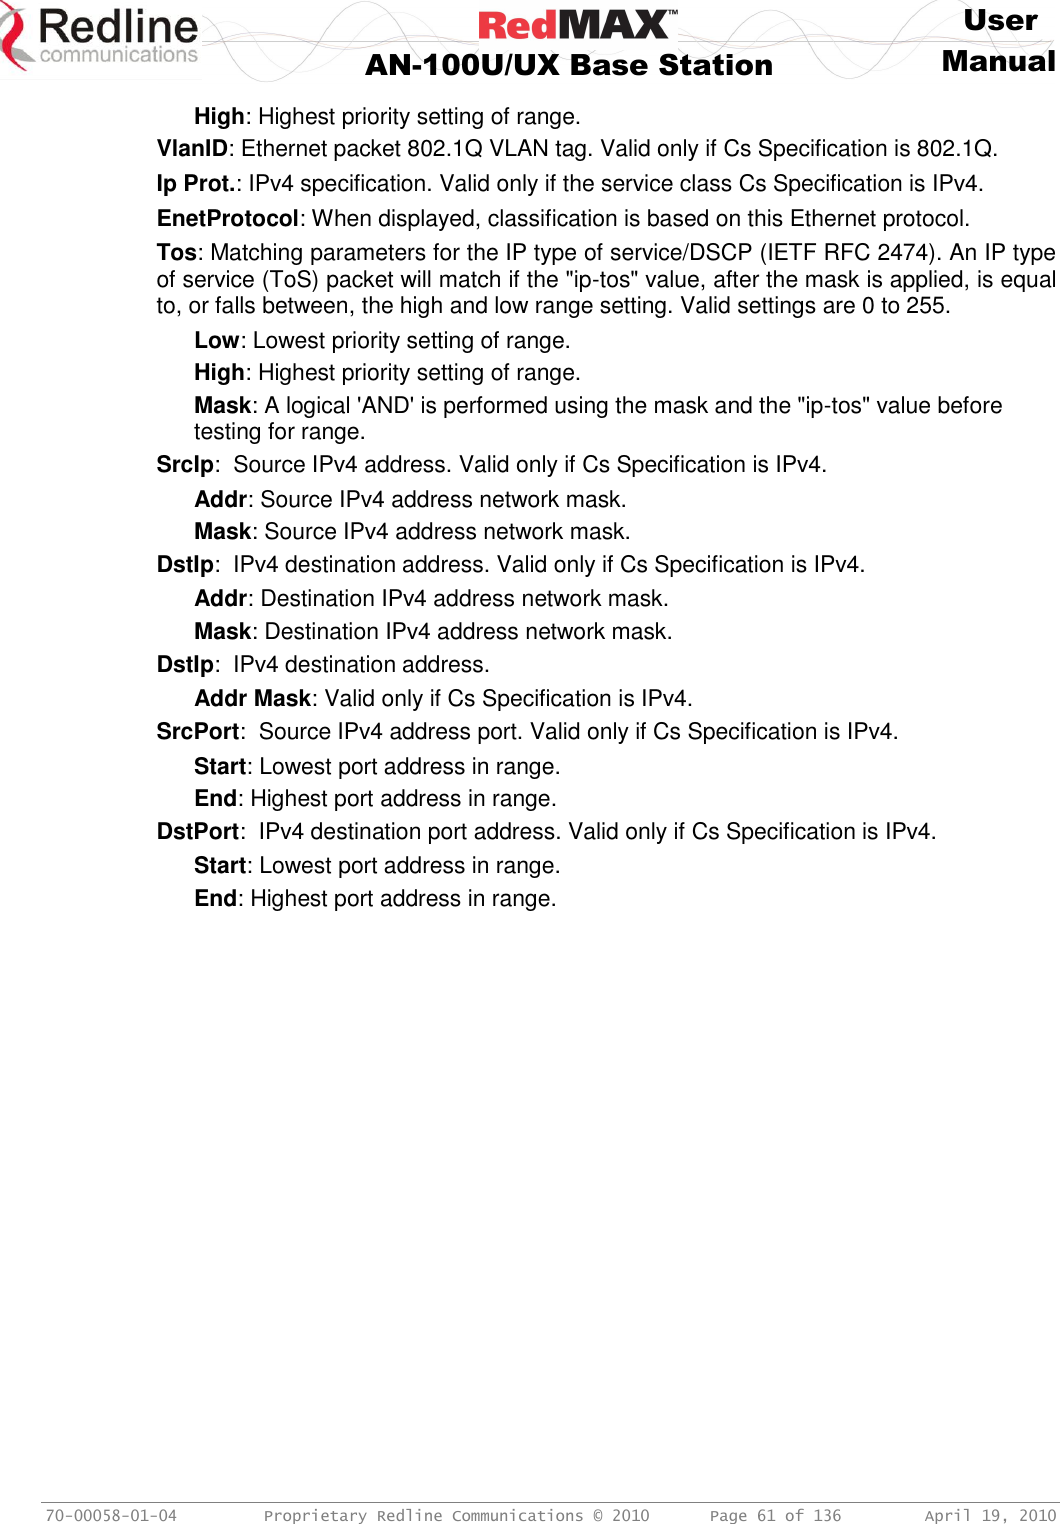     User  AN-100U/UX Base Station Manual   70-00058-01-04  Proprietary Redline Communications © 2010   Page 61 of 136  April 19, 2010 High: Highest priority setting of range. VlanID: Ethernet packet 802.1Q VLAN tag. Valid only if Cs Specification is 802.1Q. Ip Prot.: IPv4 specification. Valid only if the service class Cs Specification is IPv4. EnetProtocol: When displayed, classification is based on this Ethernet protocol. Tos: Matching parameters for the IP type of service/DSCP (IETF RFC 2474). An IP type of service (ToS) packet will match if the &quot;ip-tos&quot; value, after the mask is applied, is equal to, or falls between, the high and low range setting. Valid settings are 0 to 255. Low: Lowest priority setting of range. High: Highest priority setting of range. Mask: A logical &apos;AND&apos; is performed using the mask and the &quot;ip-tos&quot; value before testing for range. SrcIp:  Source IPv4 address. Valid only if Cs Specification is IPv4. Addr: Source IPv4 address network mask. Mask: Source IPv4 address network mask. DstIp:  IPv4 destination address. Valid only if Cs Specification is IPv4. Addr: Destination IPv4 address network mask. Mask: Destination IPv4 address network mask. DstIp:  IPv4 destination address. Addr Mask: Valid only if Cs Specification is IPv4. SrcPort:  Source IPv4 address port. Valid only if Cs Specification is IPv4. Start: Lowest port address in range. End: Highest port address in range. DstPort:  IPv4 destination port address. Valid only if Cs Specification is IPv4. Start: Lowest port address in range. End: Highest port address in range. 